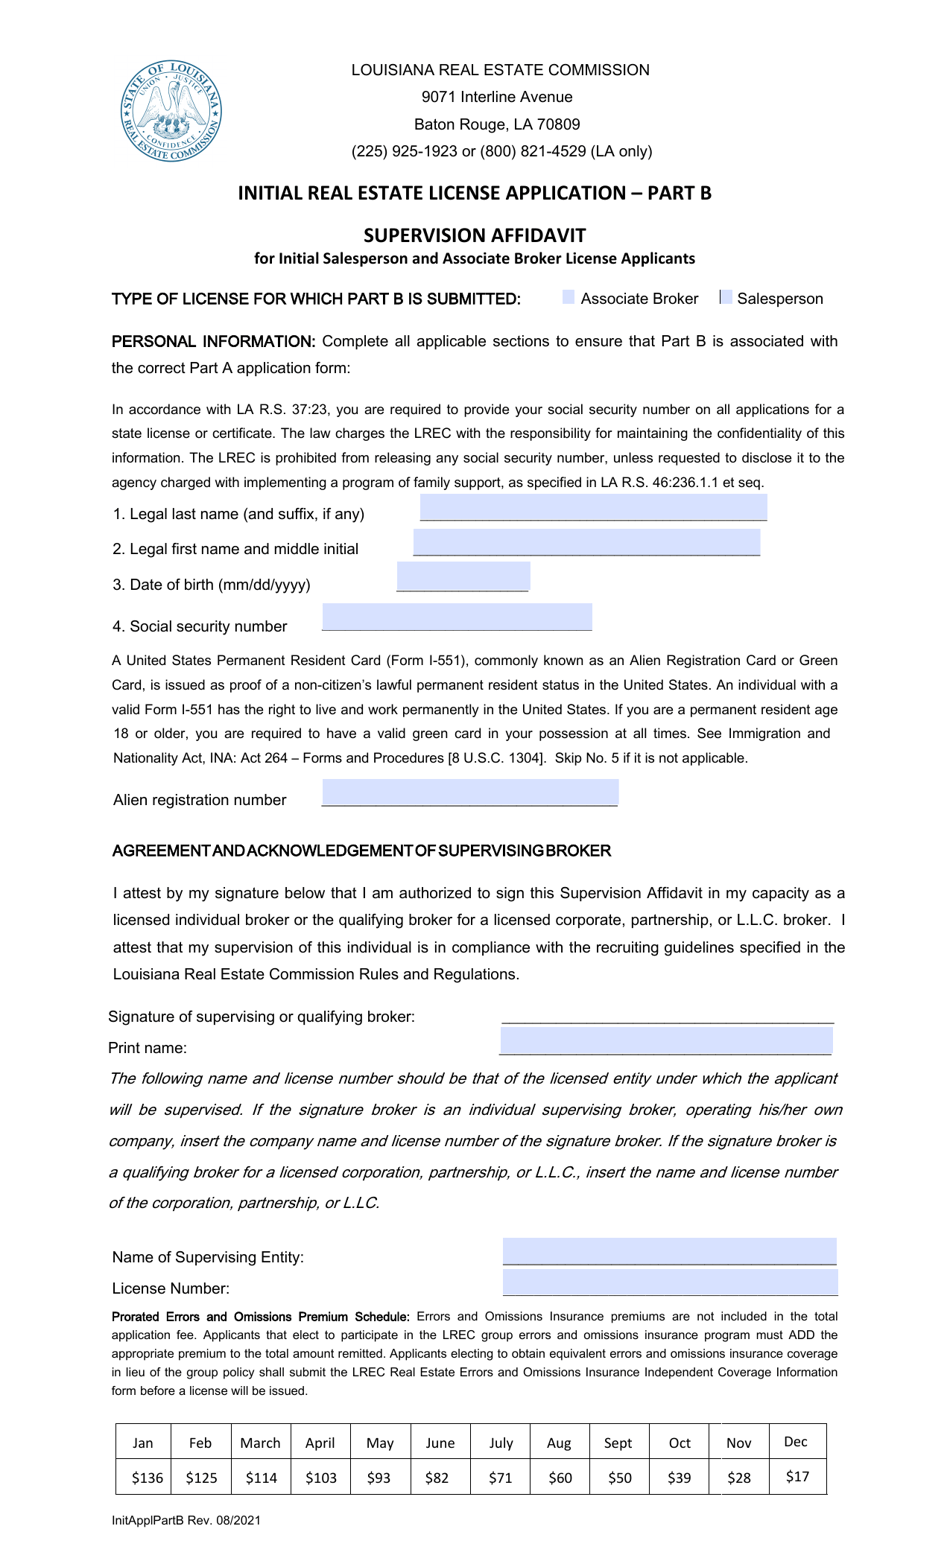 Part B Initial Real Estate License Application - Supervision Affidavit for Initial Salesperson and Associate Broker License Applicants - Louisiana, Page 1